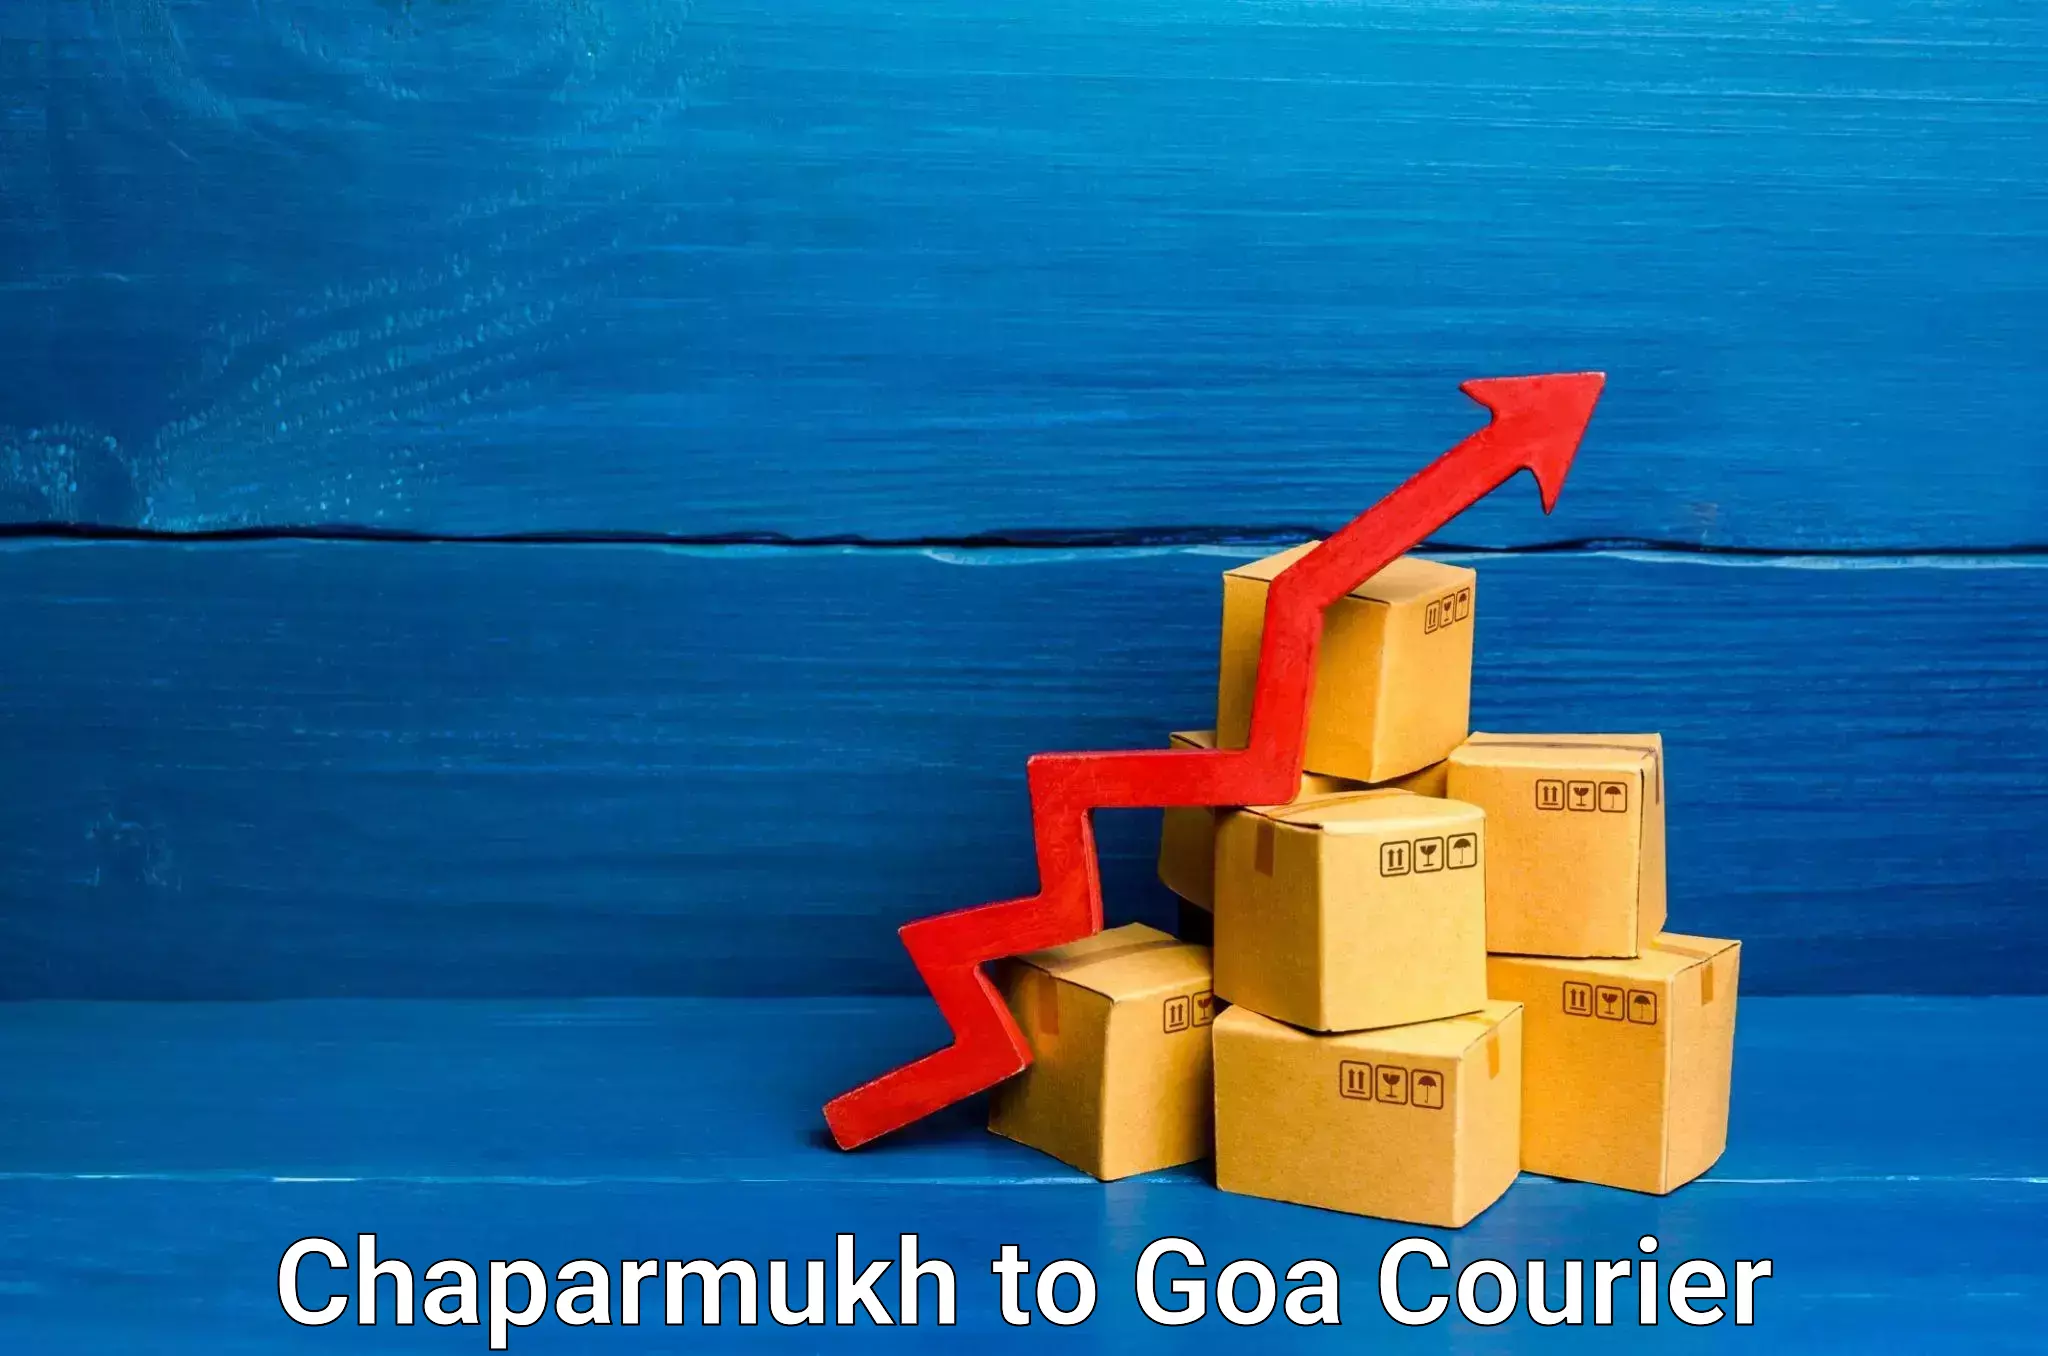 On-call courier service Chaparmukh to Goa